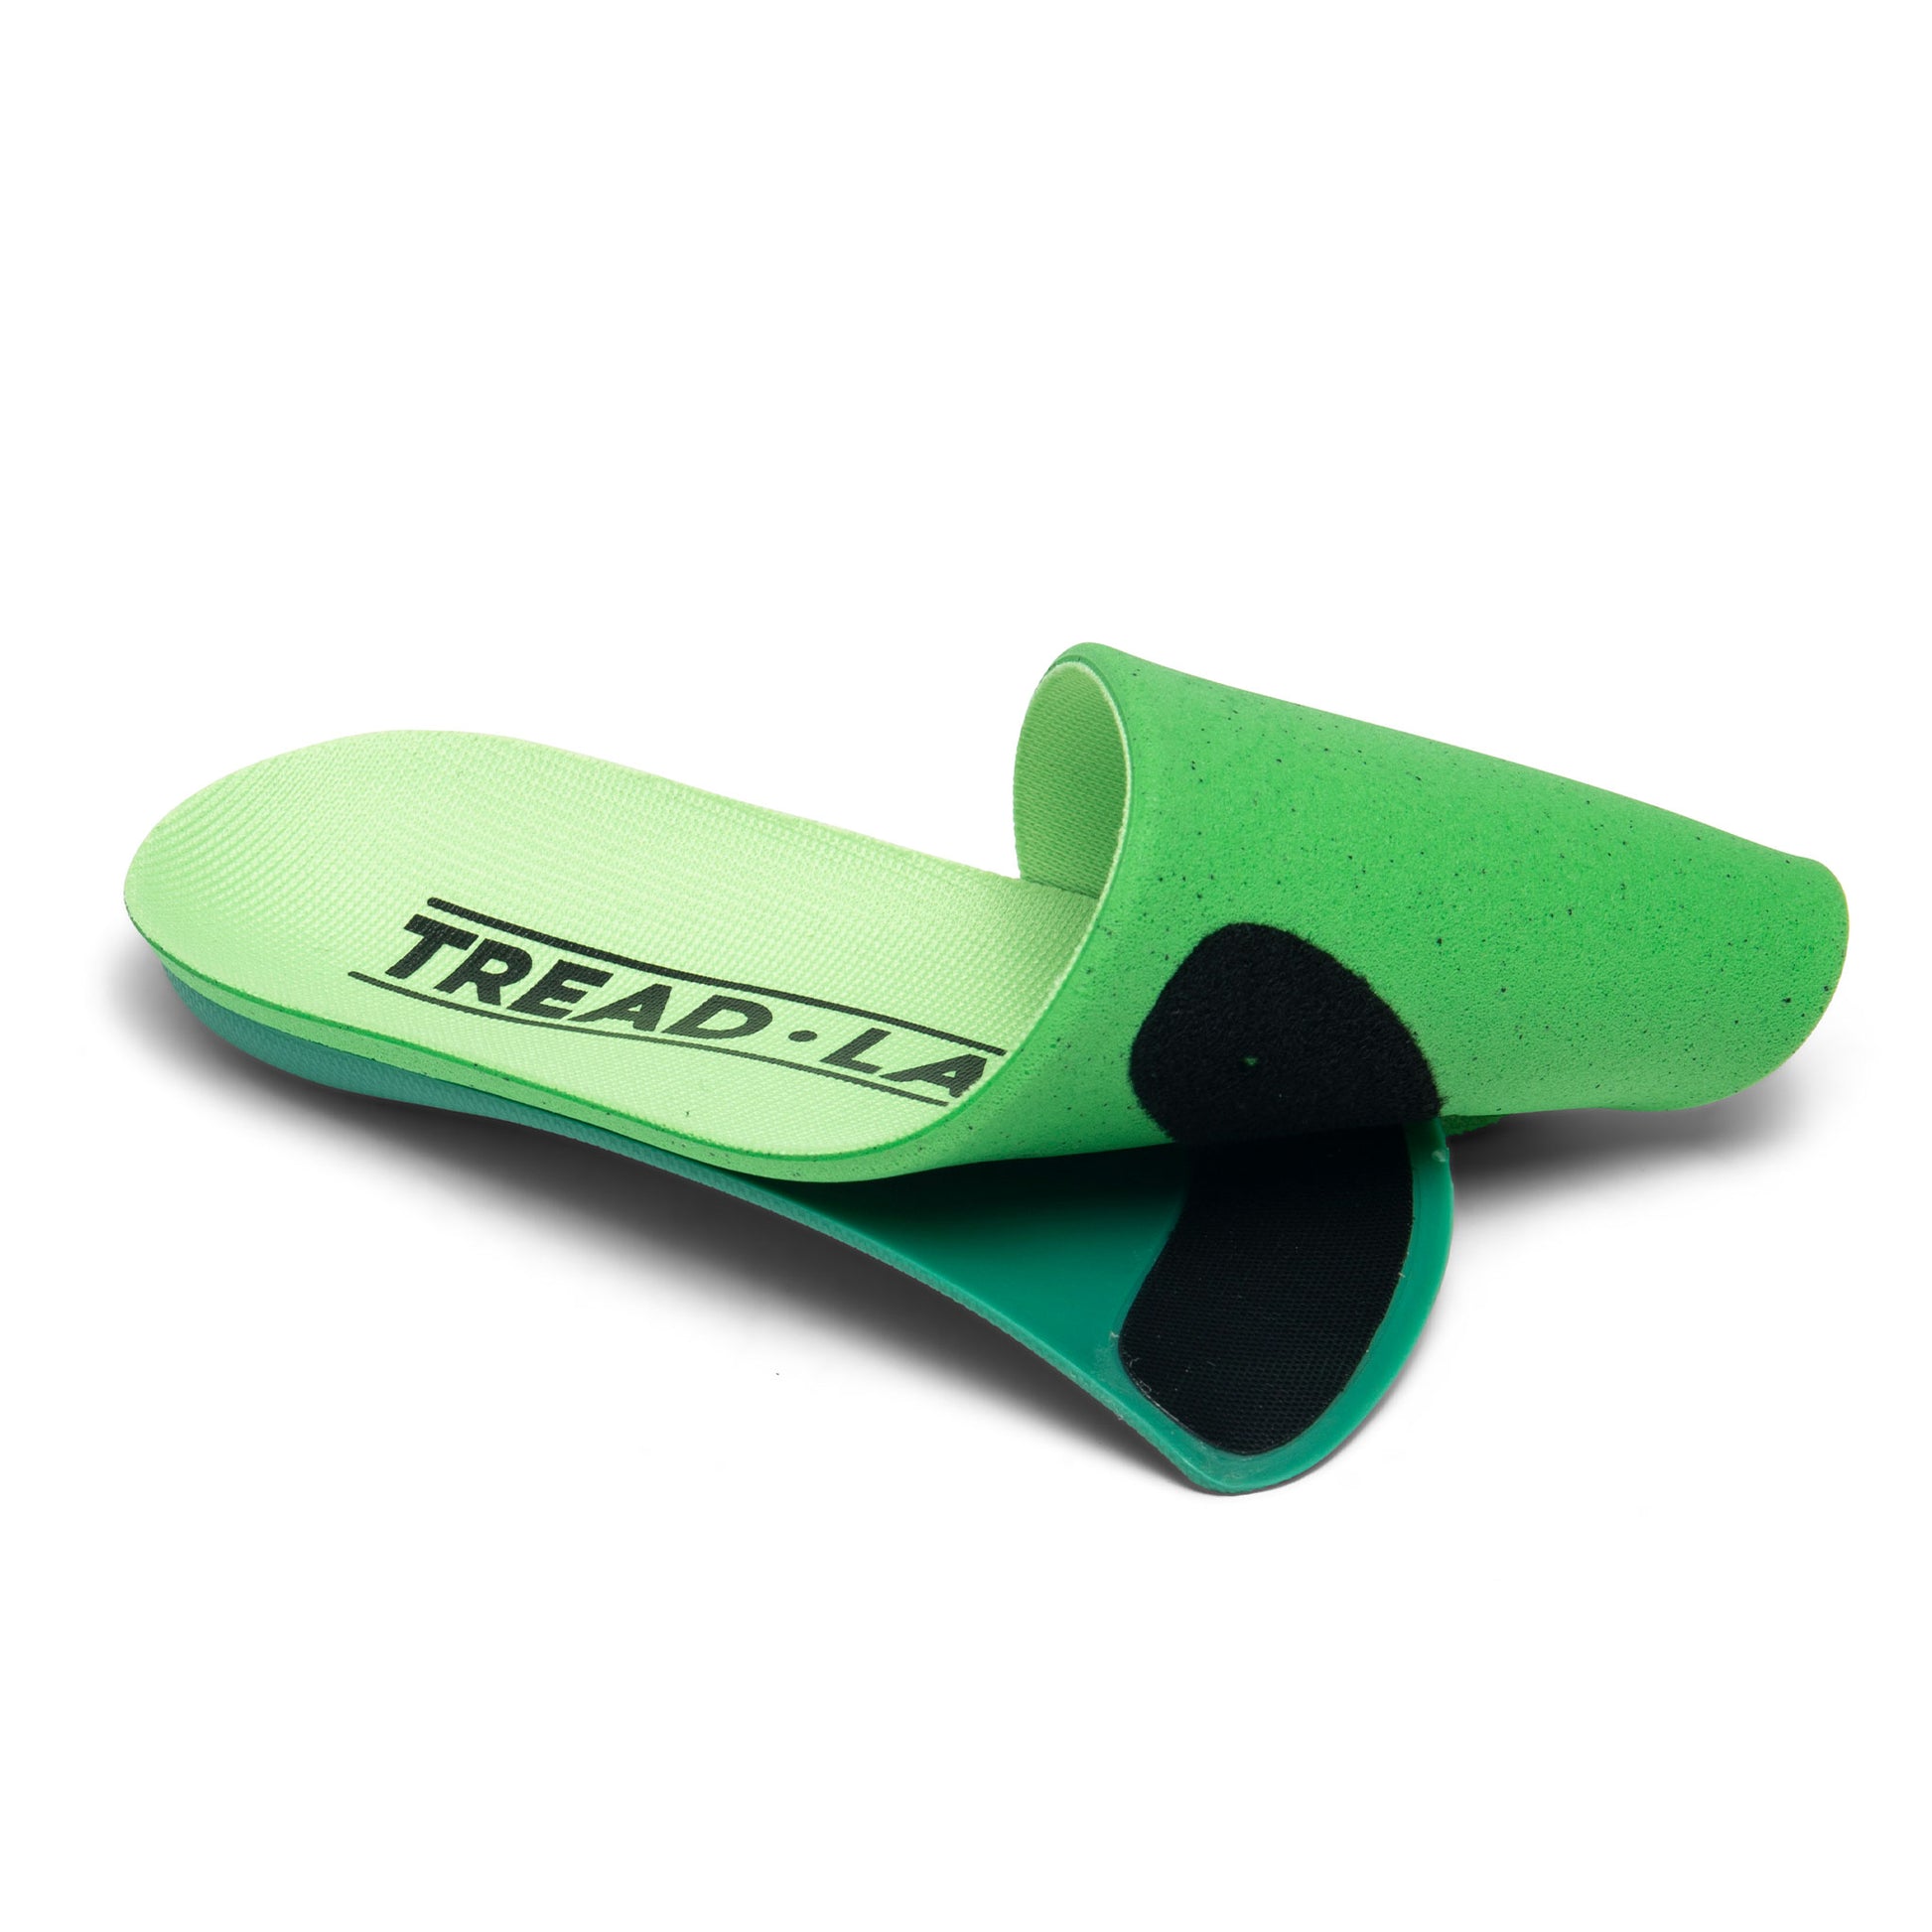 Buy orthotic insoles with replacement top covers